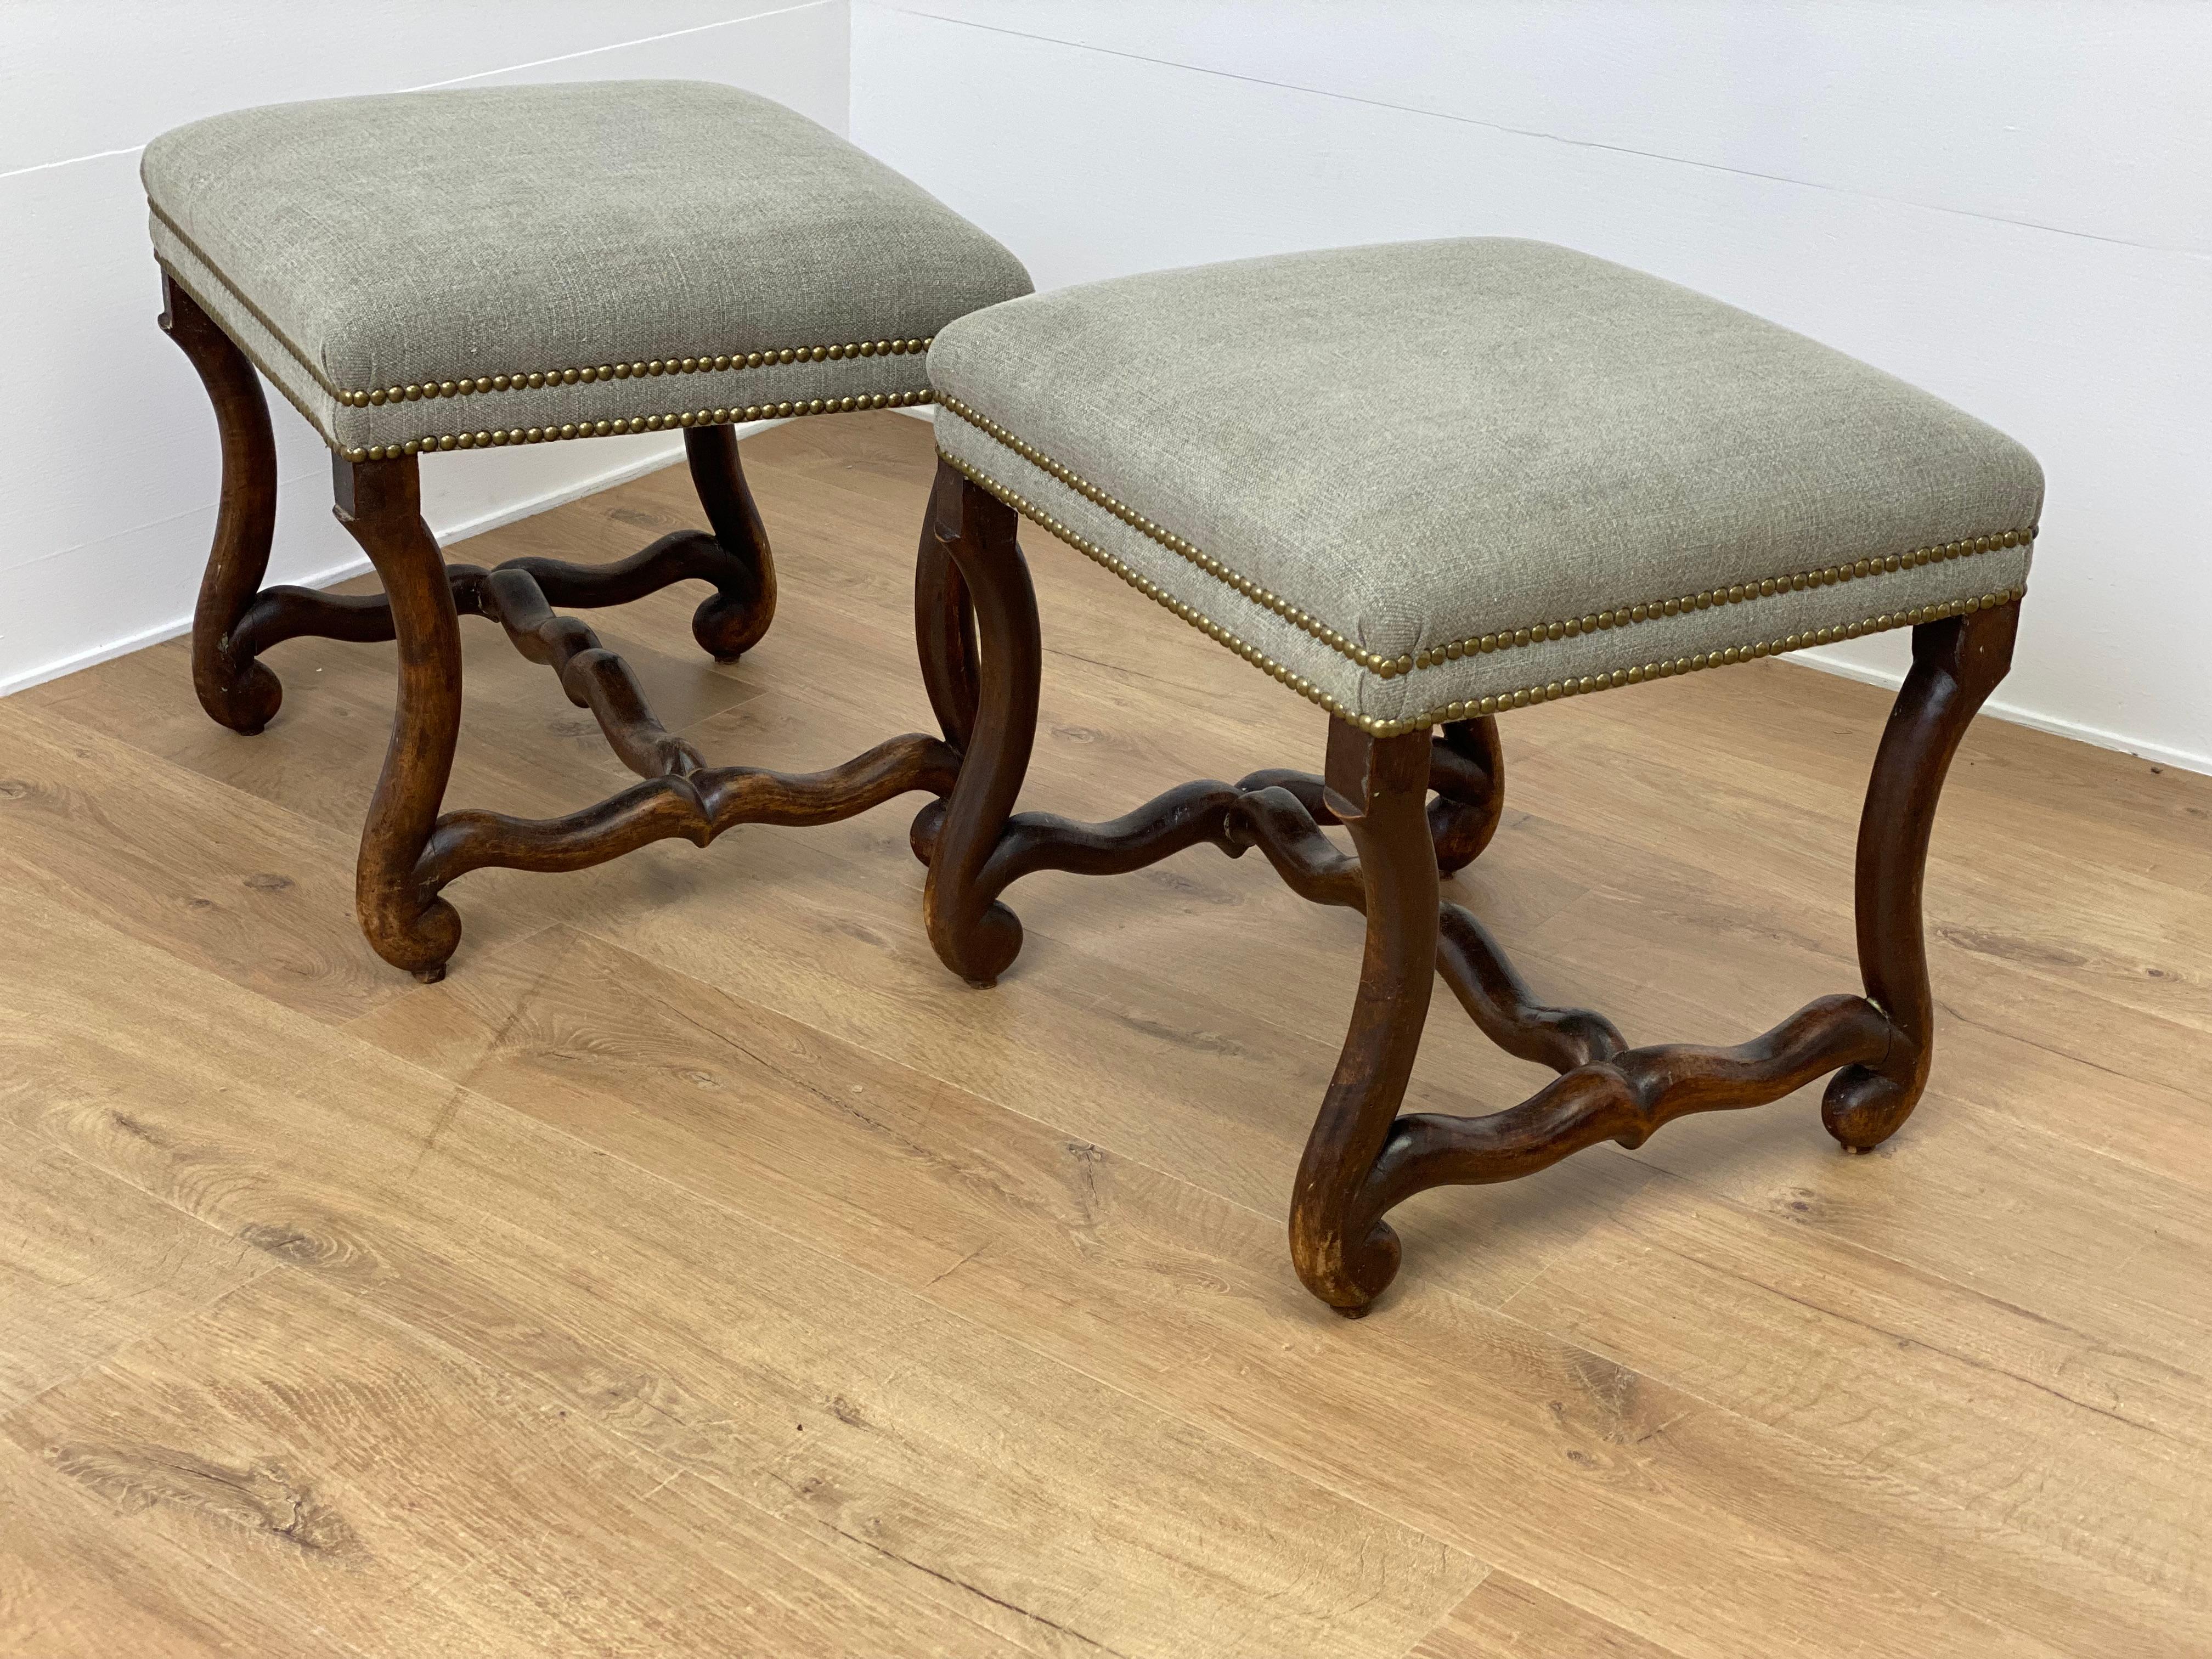 Pair Of French Antique Louis XIII Footstools In Excellent Condition For Sale In Schellebelle, BE